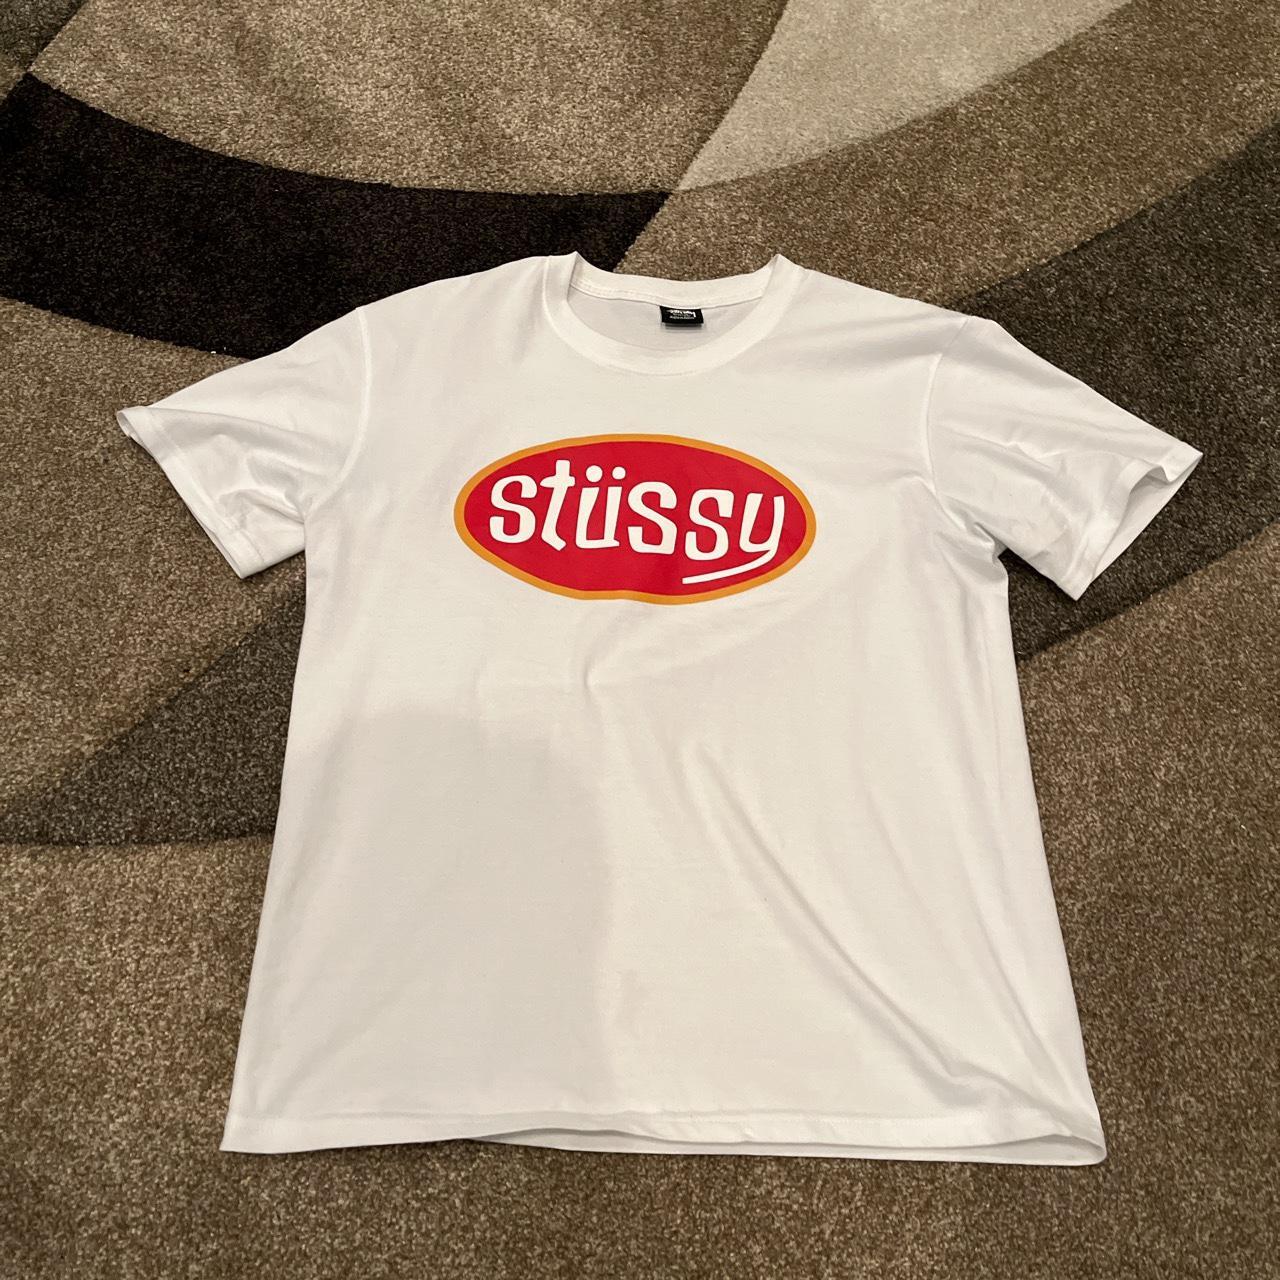 Double white and red stüssy t shirt MEDUIM - Depop